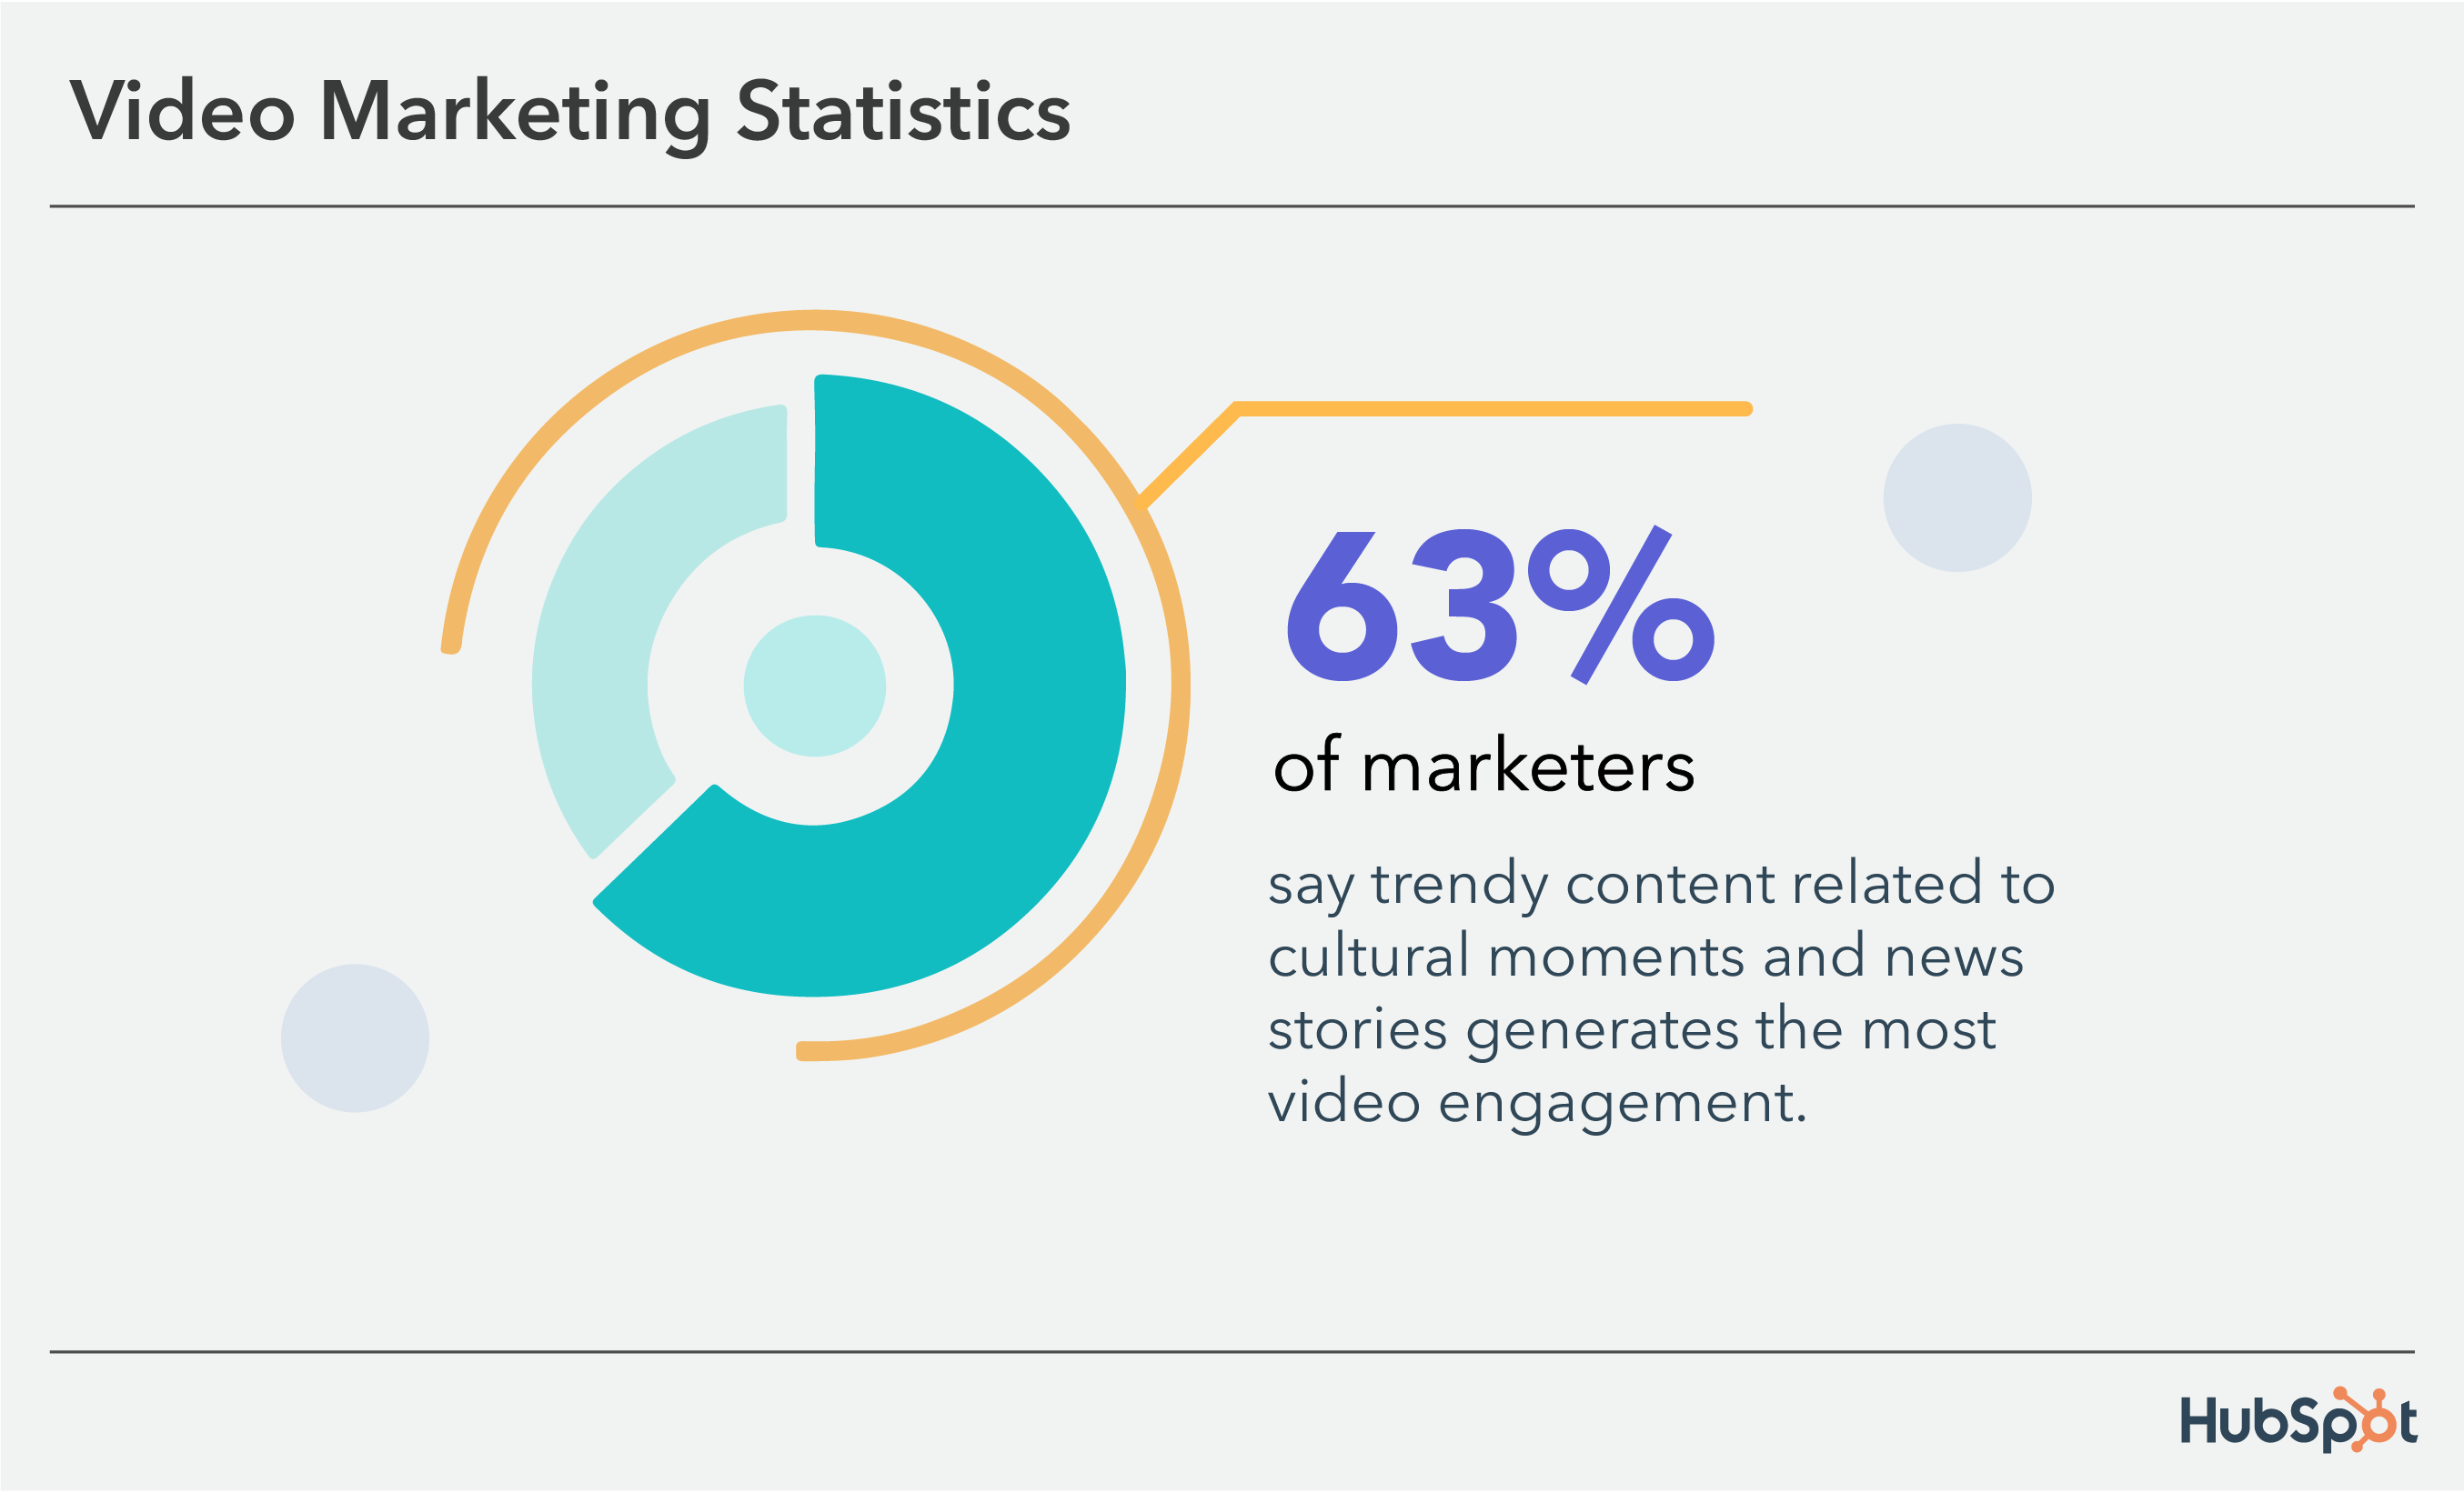 Video Marketing Statistics: 63% of marketers say trendy content drives the most video engagement.